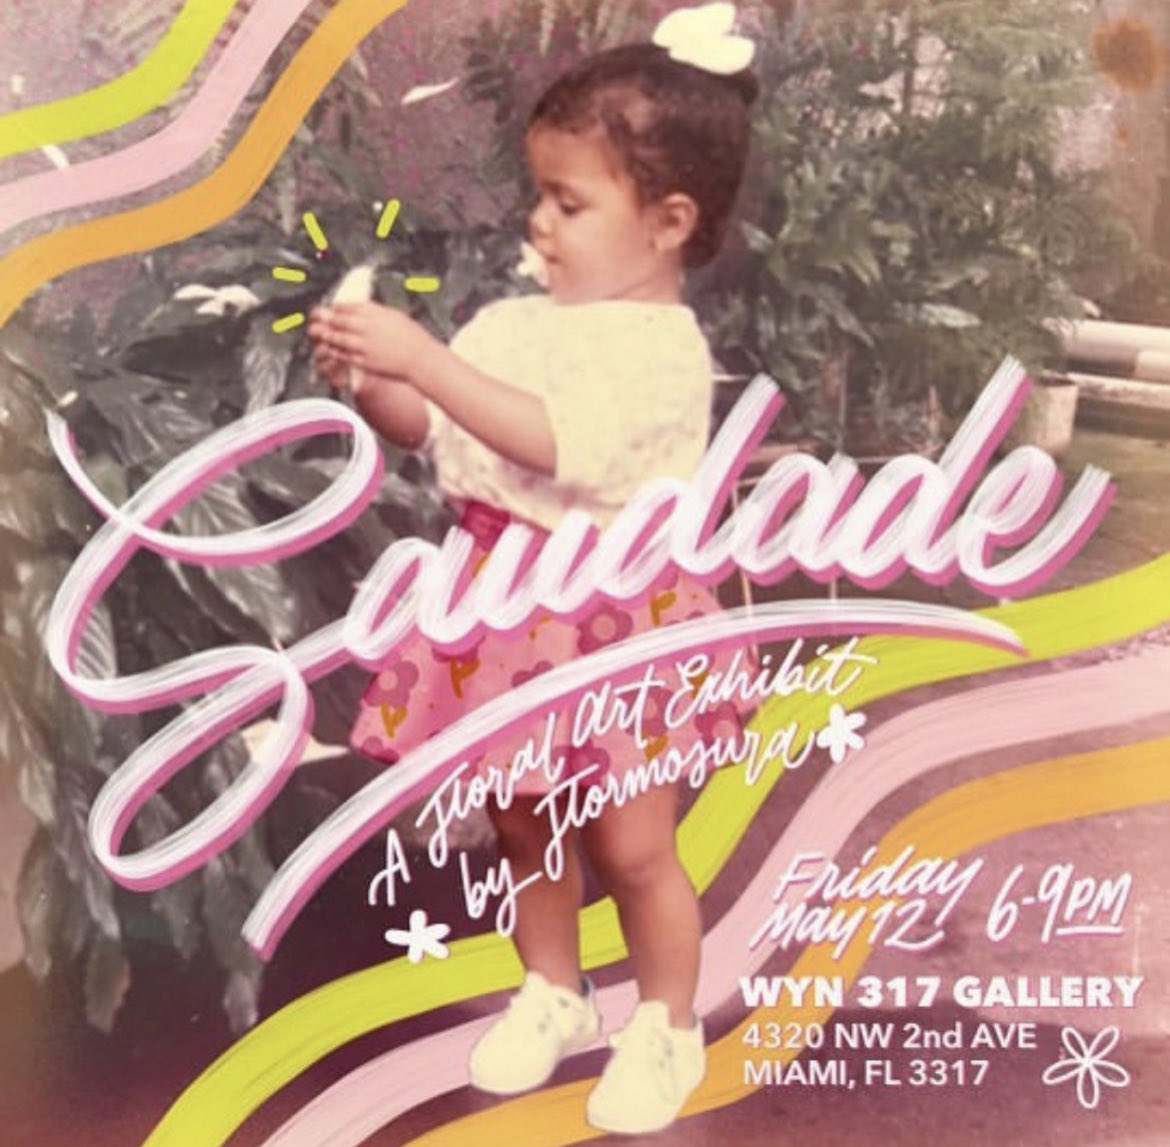 ✨SAUDADE✨
A girl can dream, come see where it all began! 
Be transported into a colorful jungle inspired by Flormosura’s hometown, Rio de Janeiro, on May 12th from 6-9 pm. ⁦@wyn317⁩
#flormosura #wyn317 #saudade #floralinstallation #colorfuljungle #florist #soloexhibtion